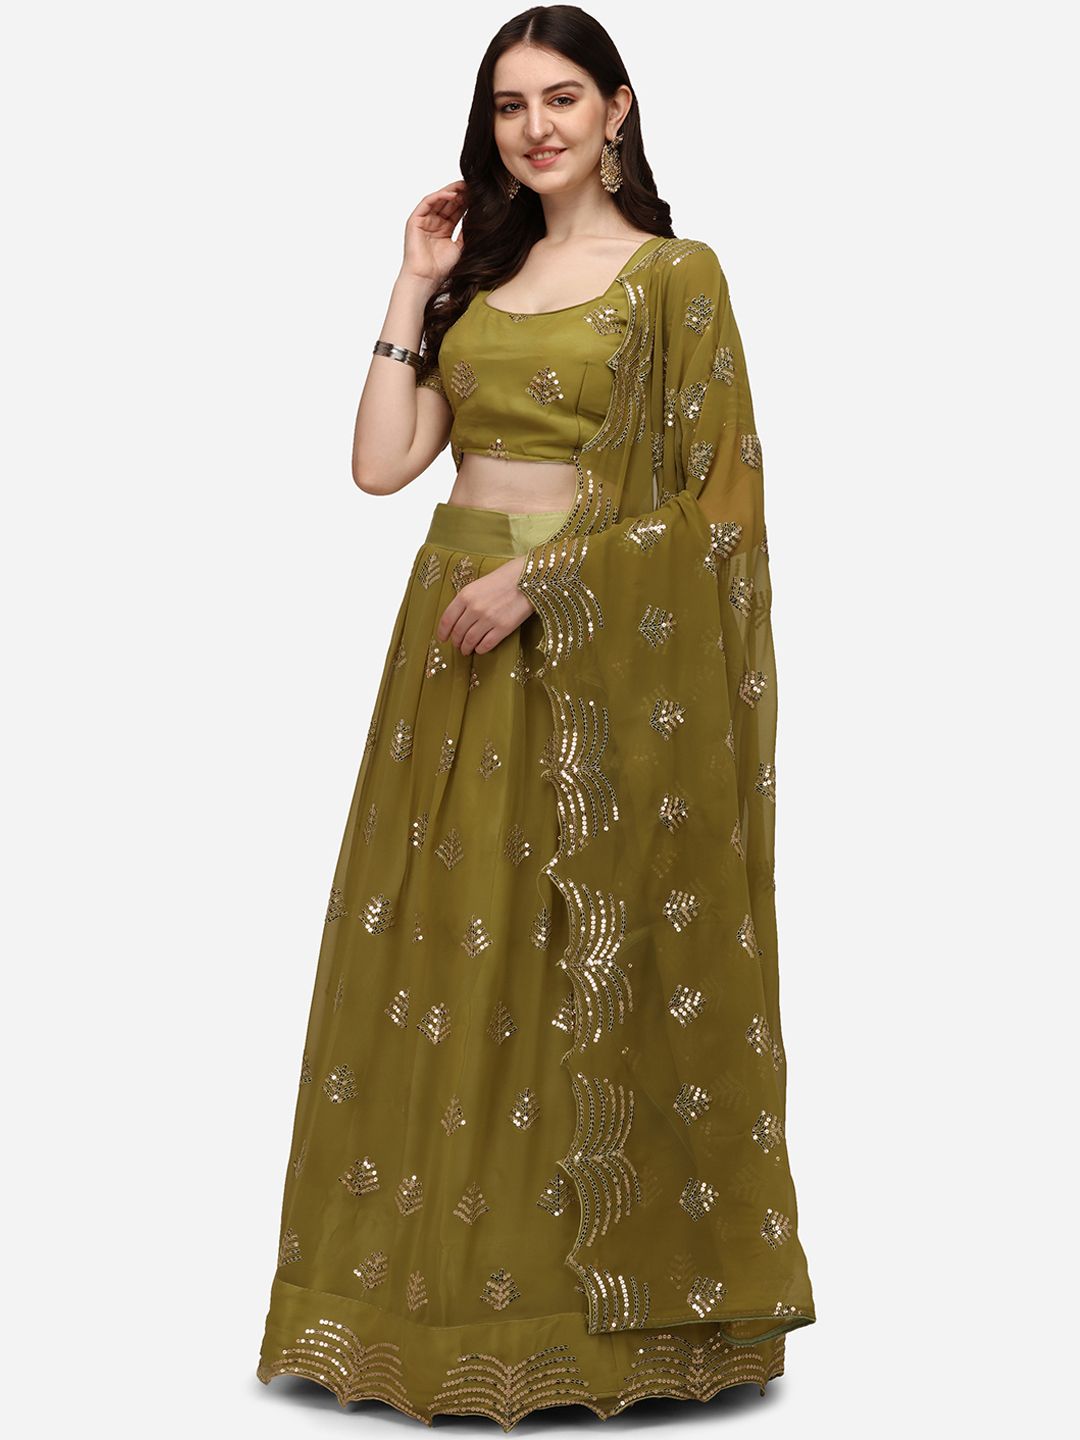 Pratham Blue Olive Green Sequinned Semi-Stitched Lehenga & Unstitched Blouse With Dupatta Price in India